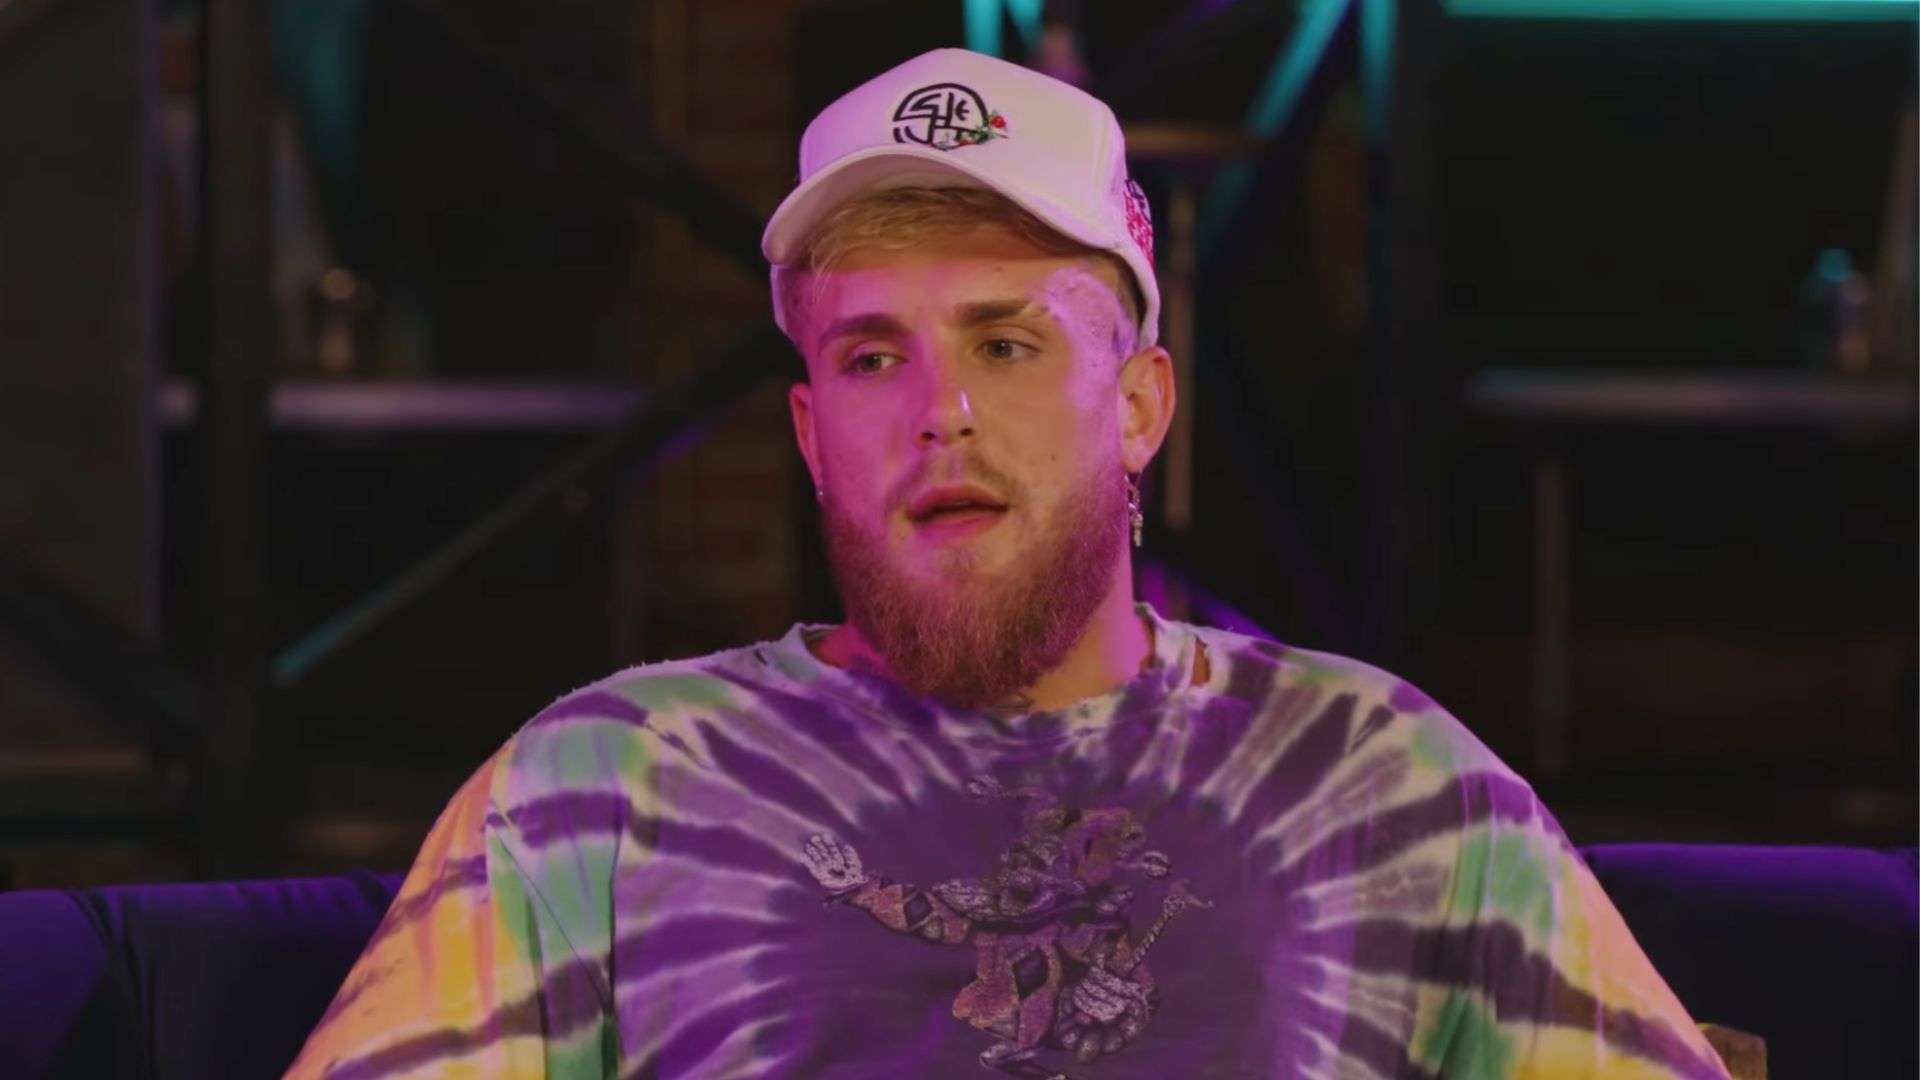 Jake Paul talking to camera in tie dye shirt and hat